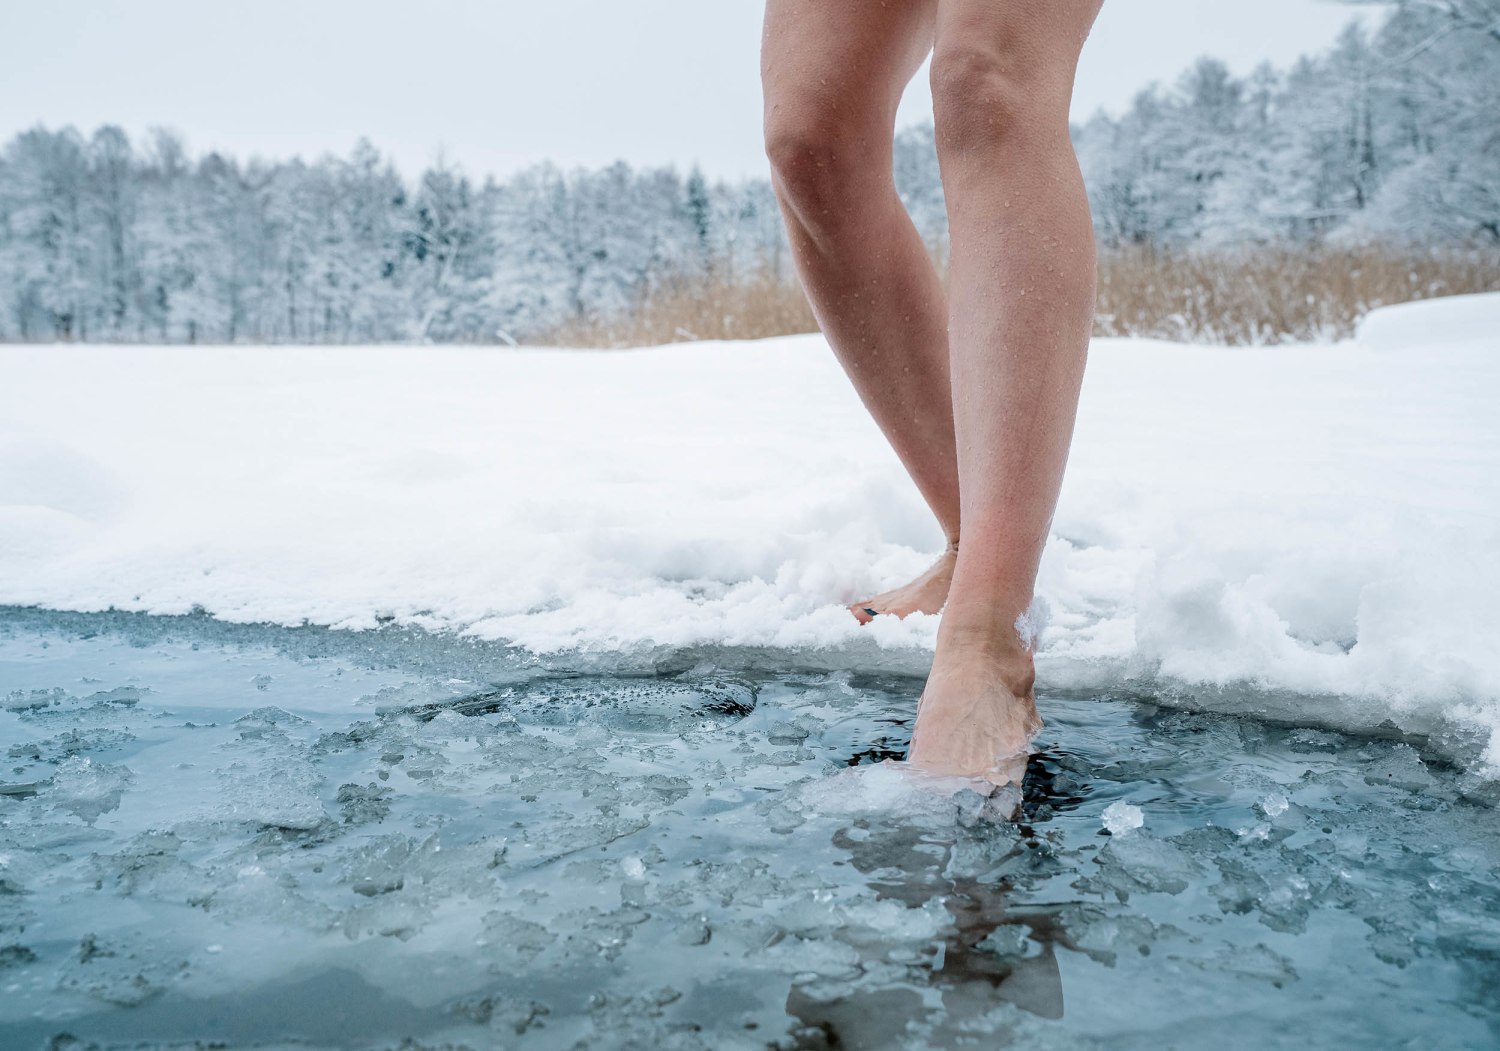 This is what a cold plunge does to your body